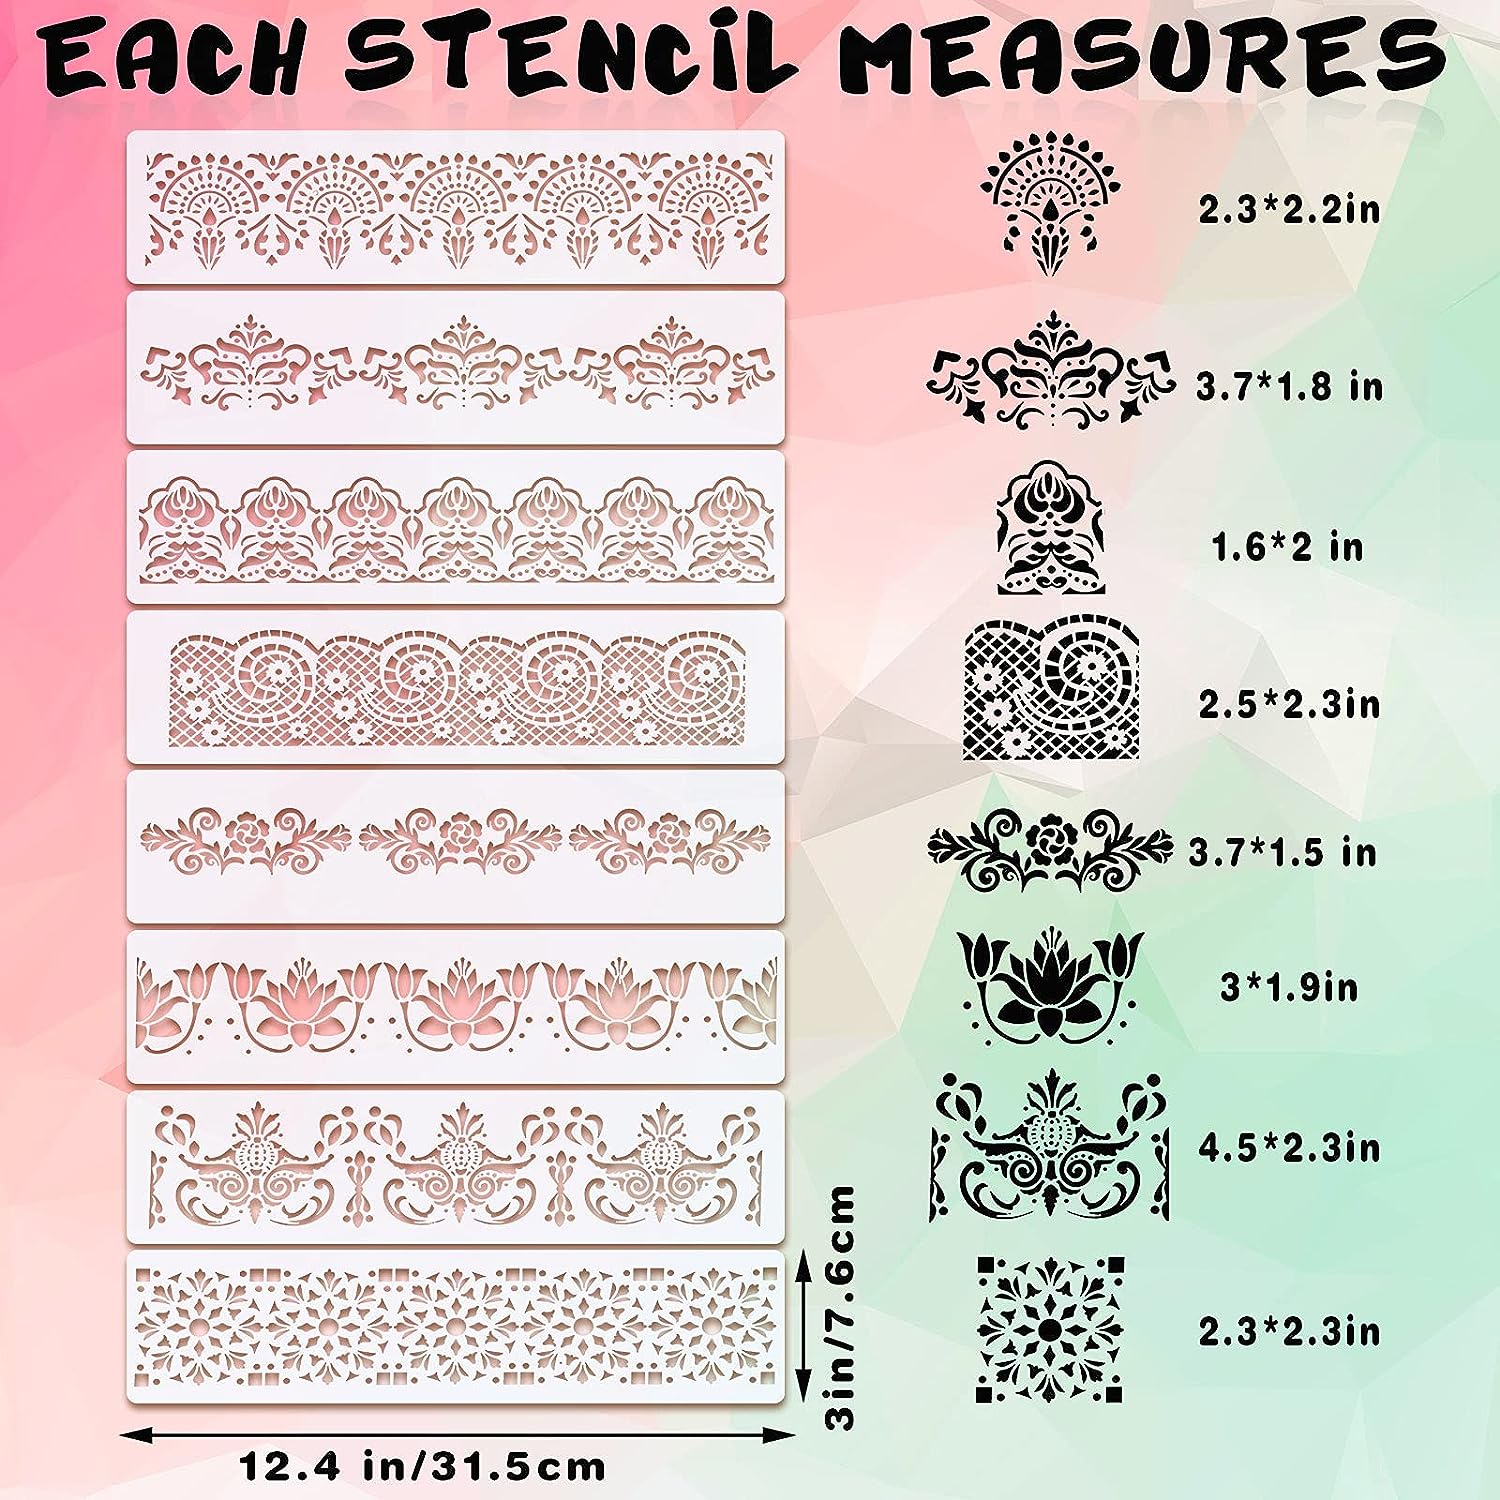 8 Pieces Ornate Border Stencil Flower Template DIY Art and Craft